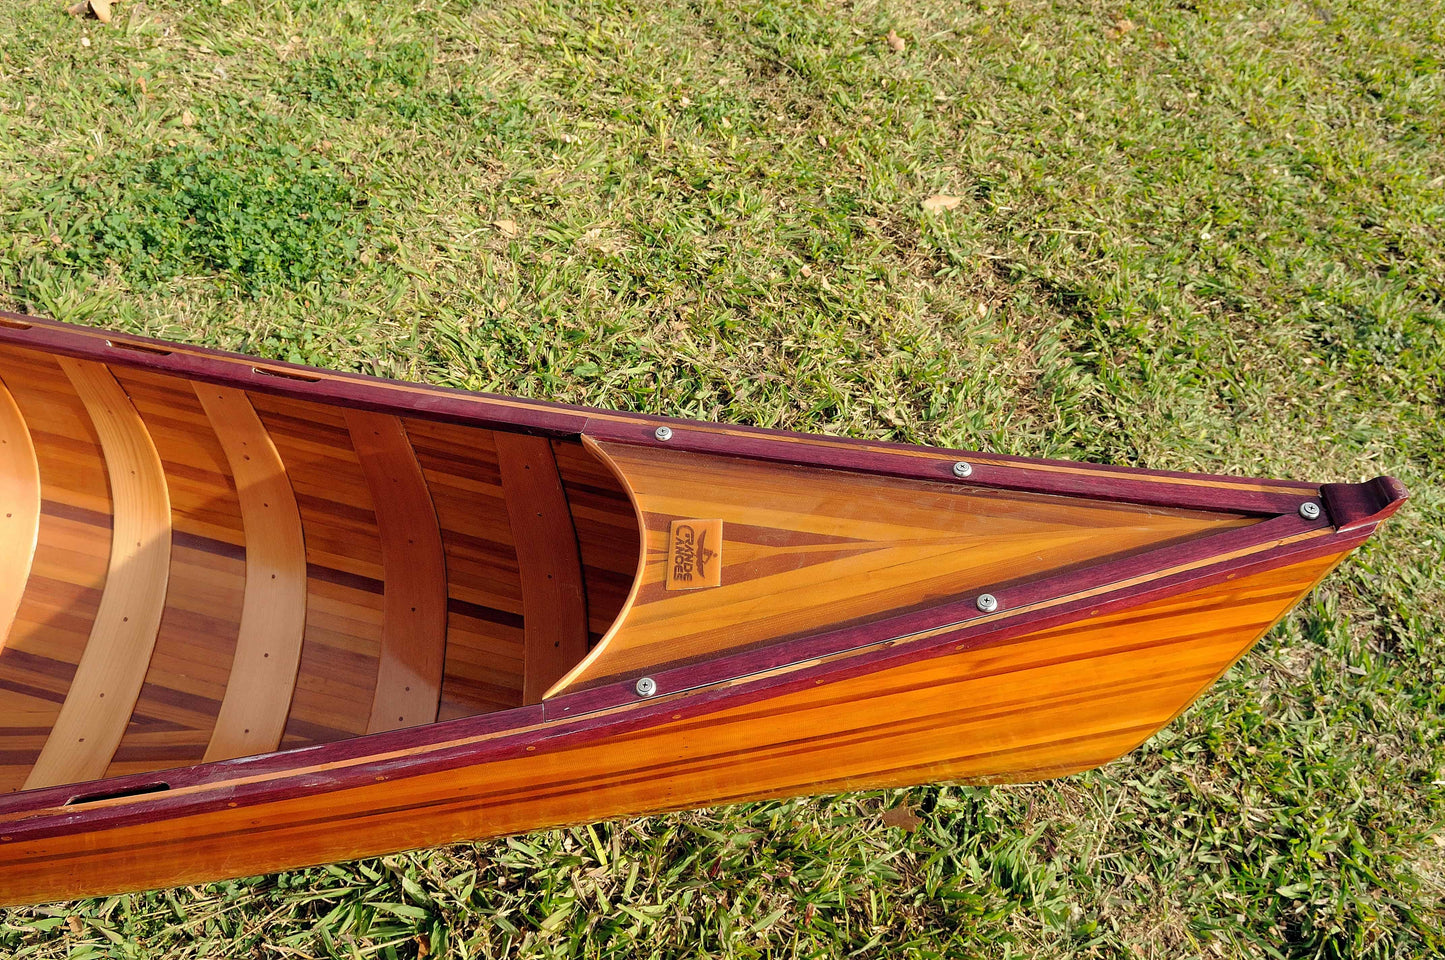 ALDO Kayaking, Canoeing & Rafting>Canoes L: 216 W: 35.5 H: 27 Inches / NEW / wood Real High Quality Canadian Cedar Canoe  With Ribs18 feet